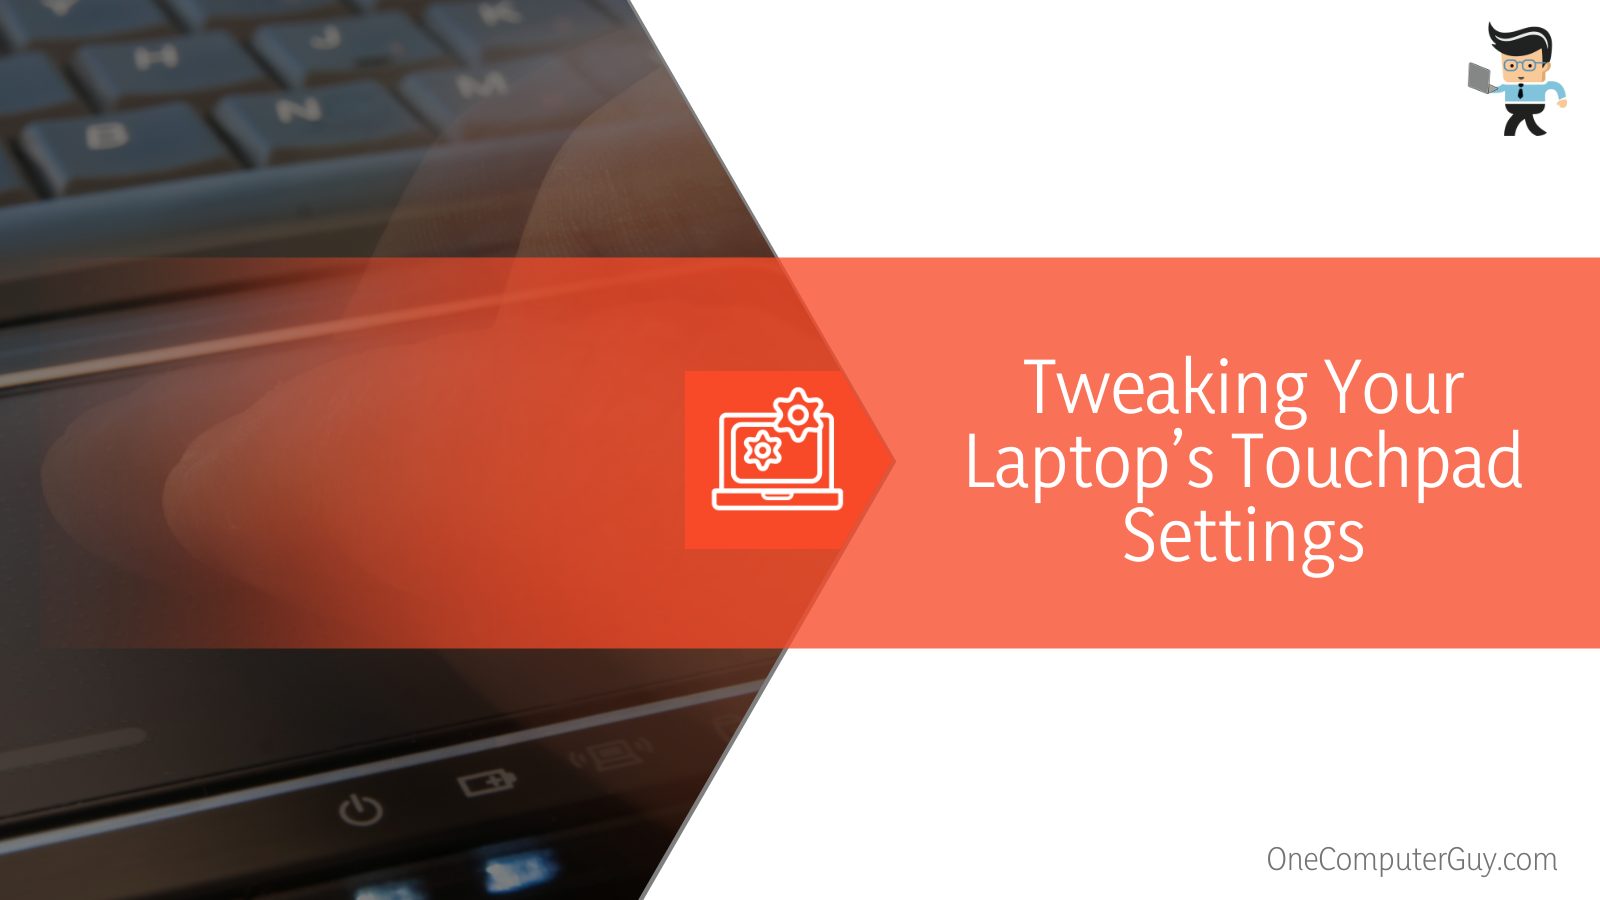 Tweaking Your Laptop’s Touchpad Settings